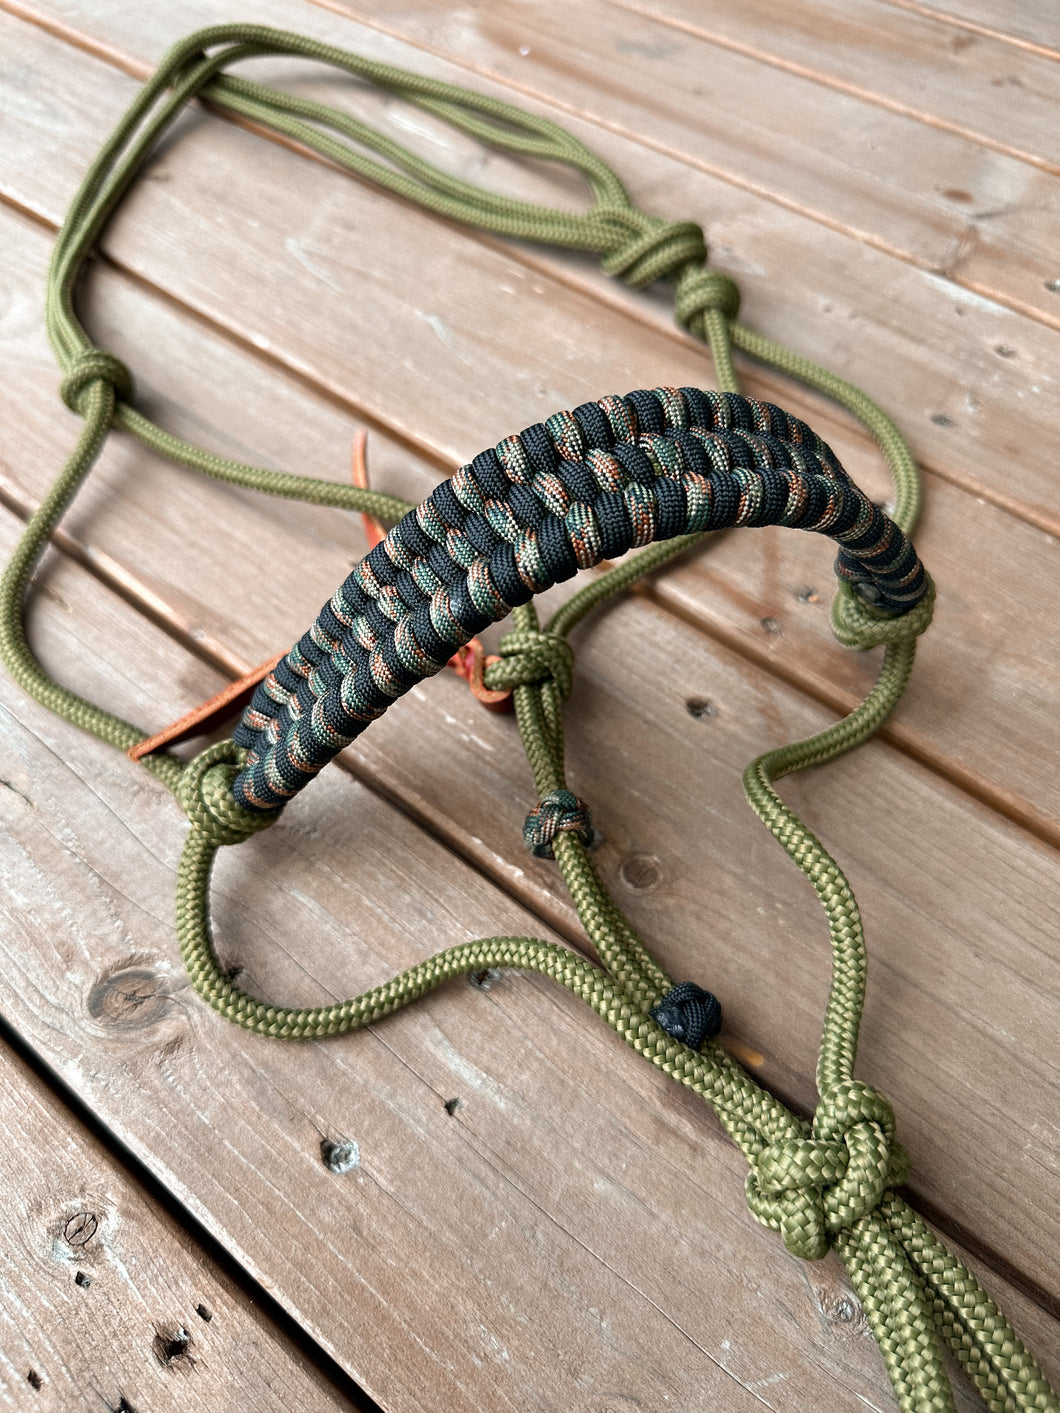 Rope Halter ”Into The Woods”